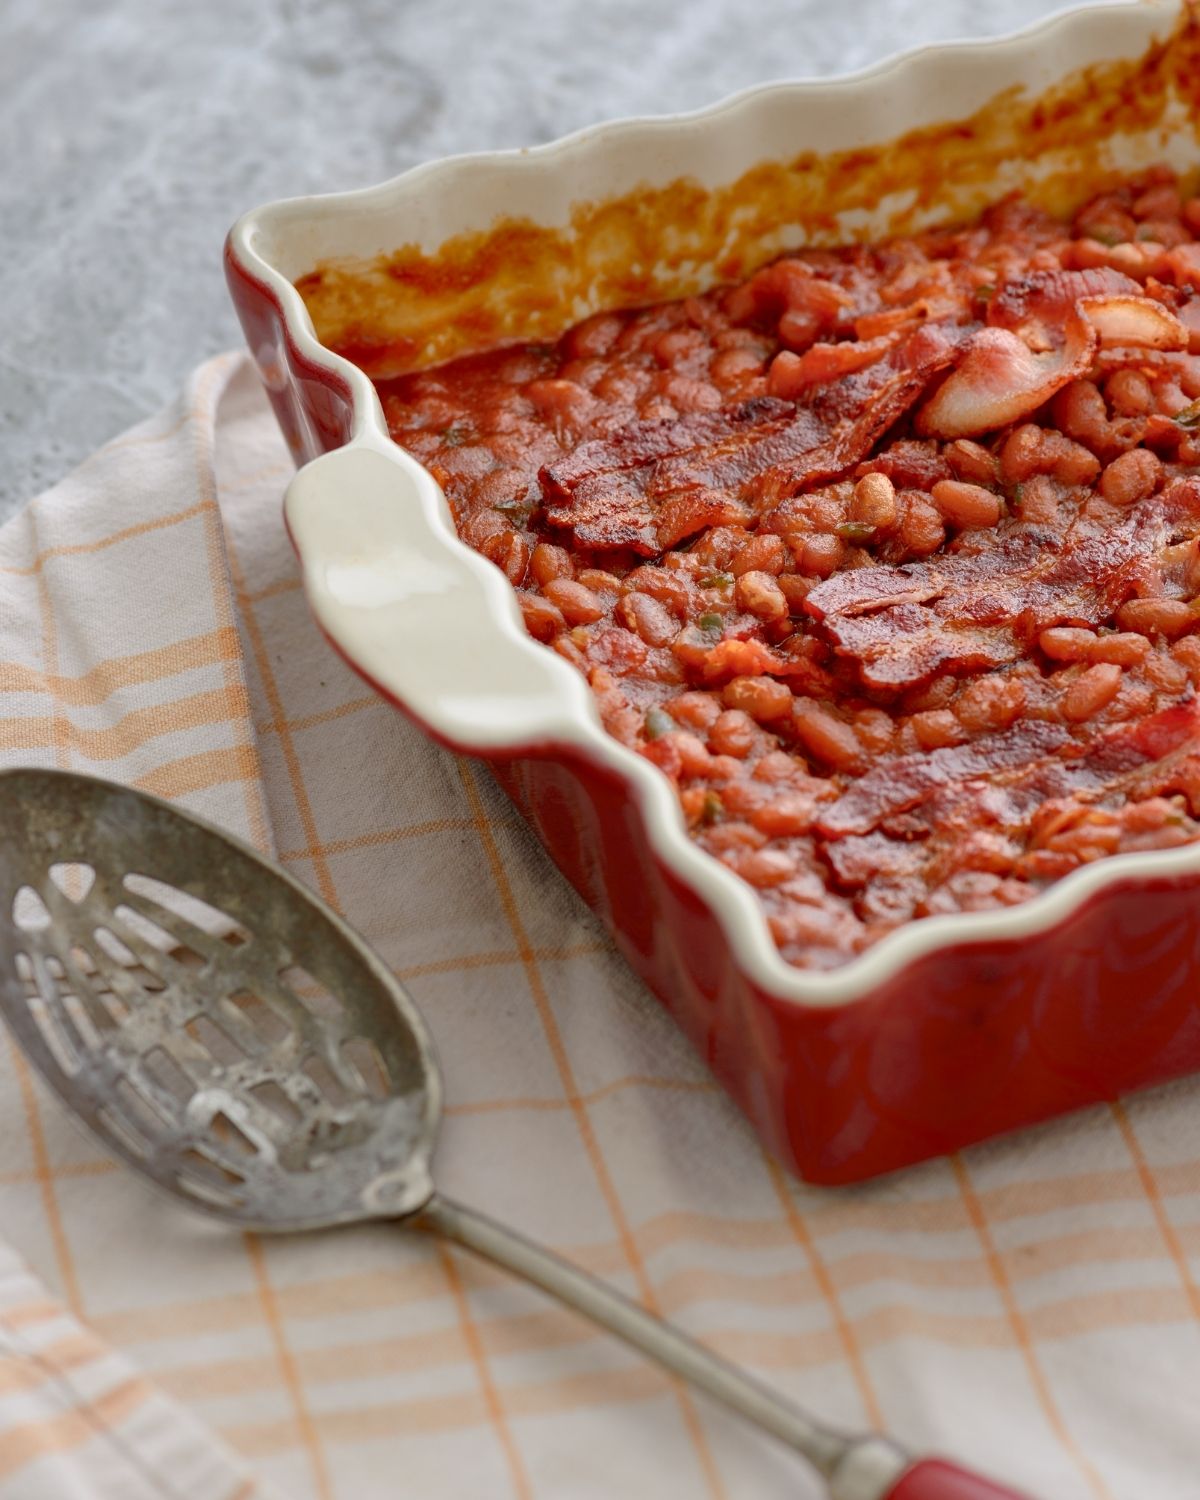 A serving spoon and a cassorle dish of baked beans.